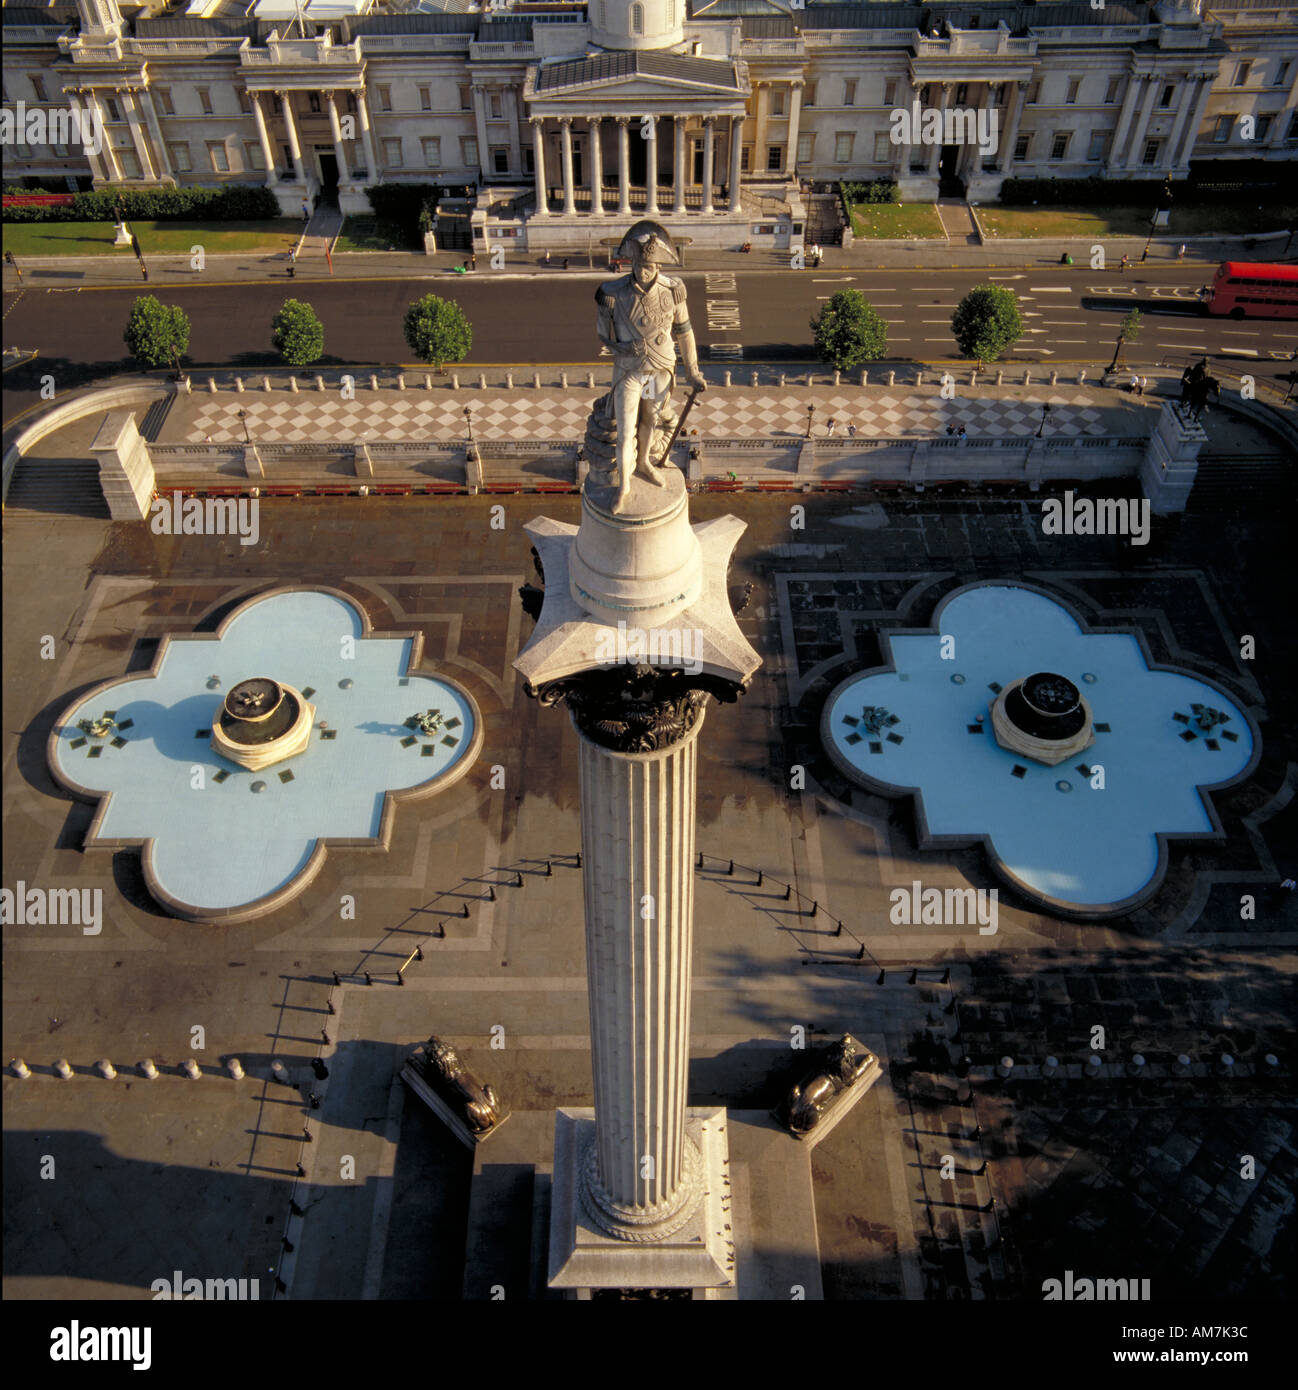 National Gallery and Nelsons Column Trafalgar Square London UK aerial view Stock Photo